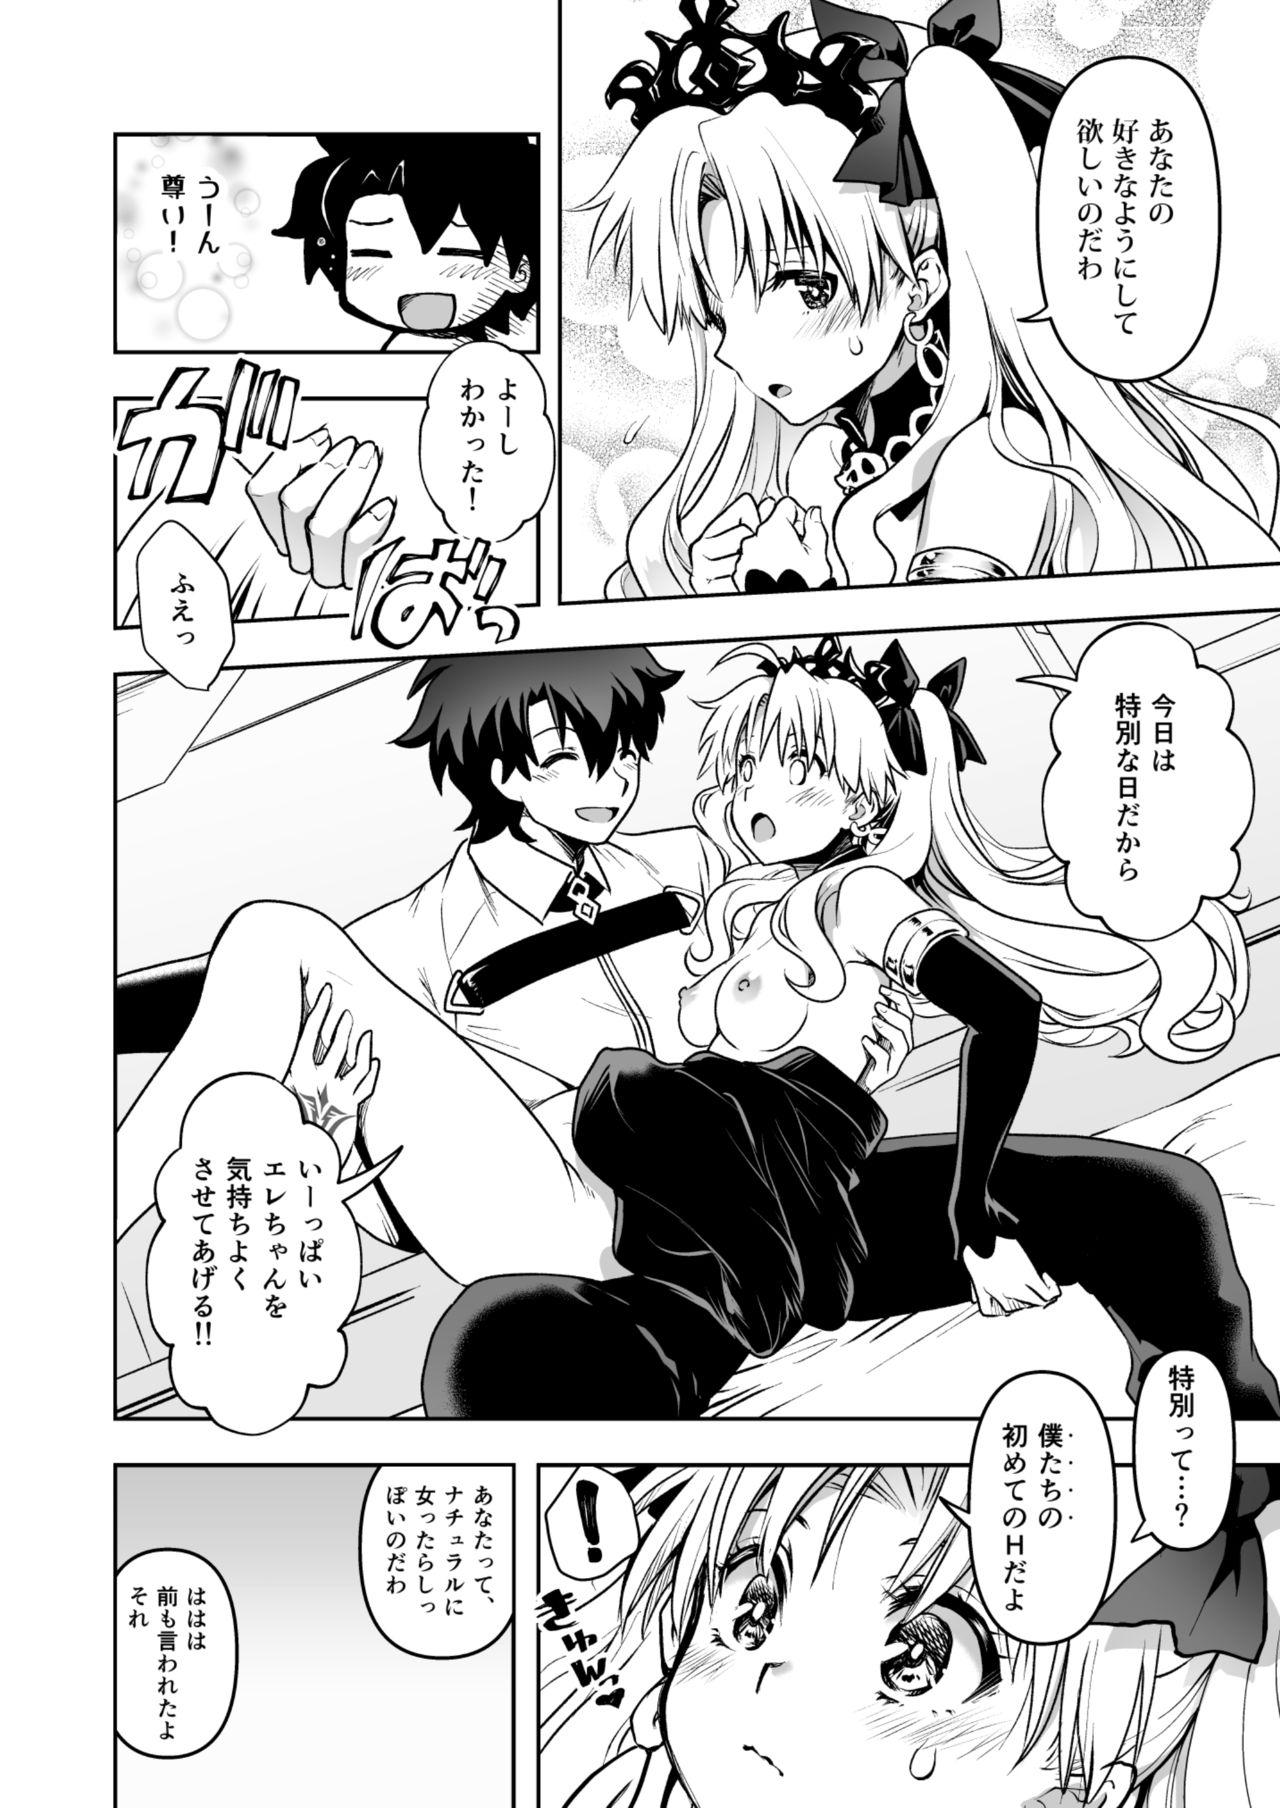 Anal Play Romance Again - Fate grand order Pasivo - Page 12